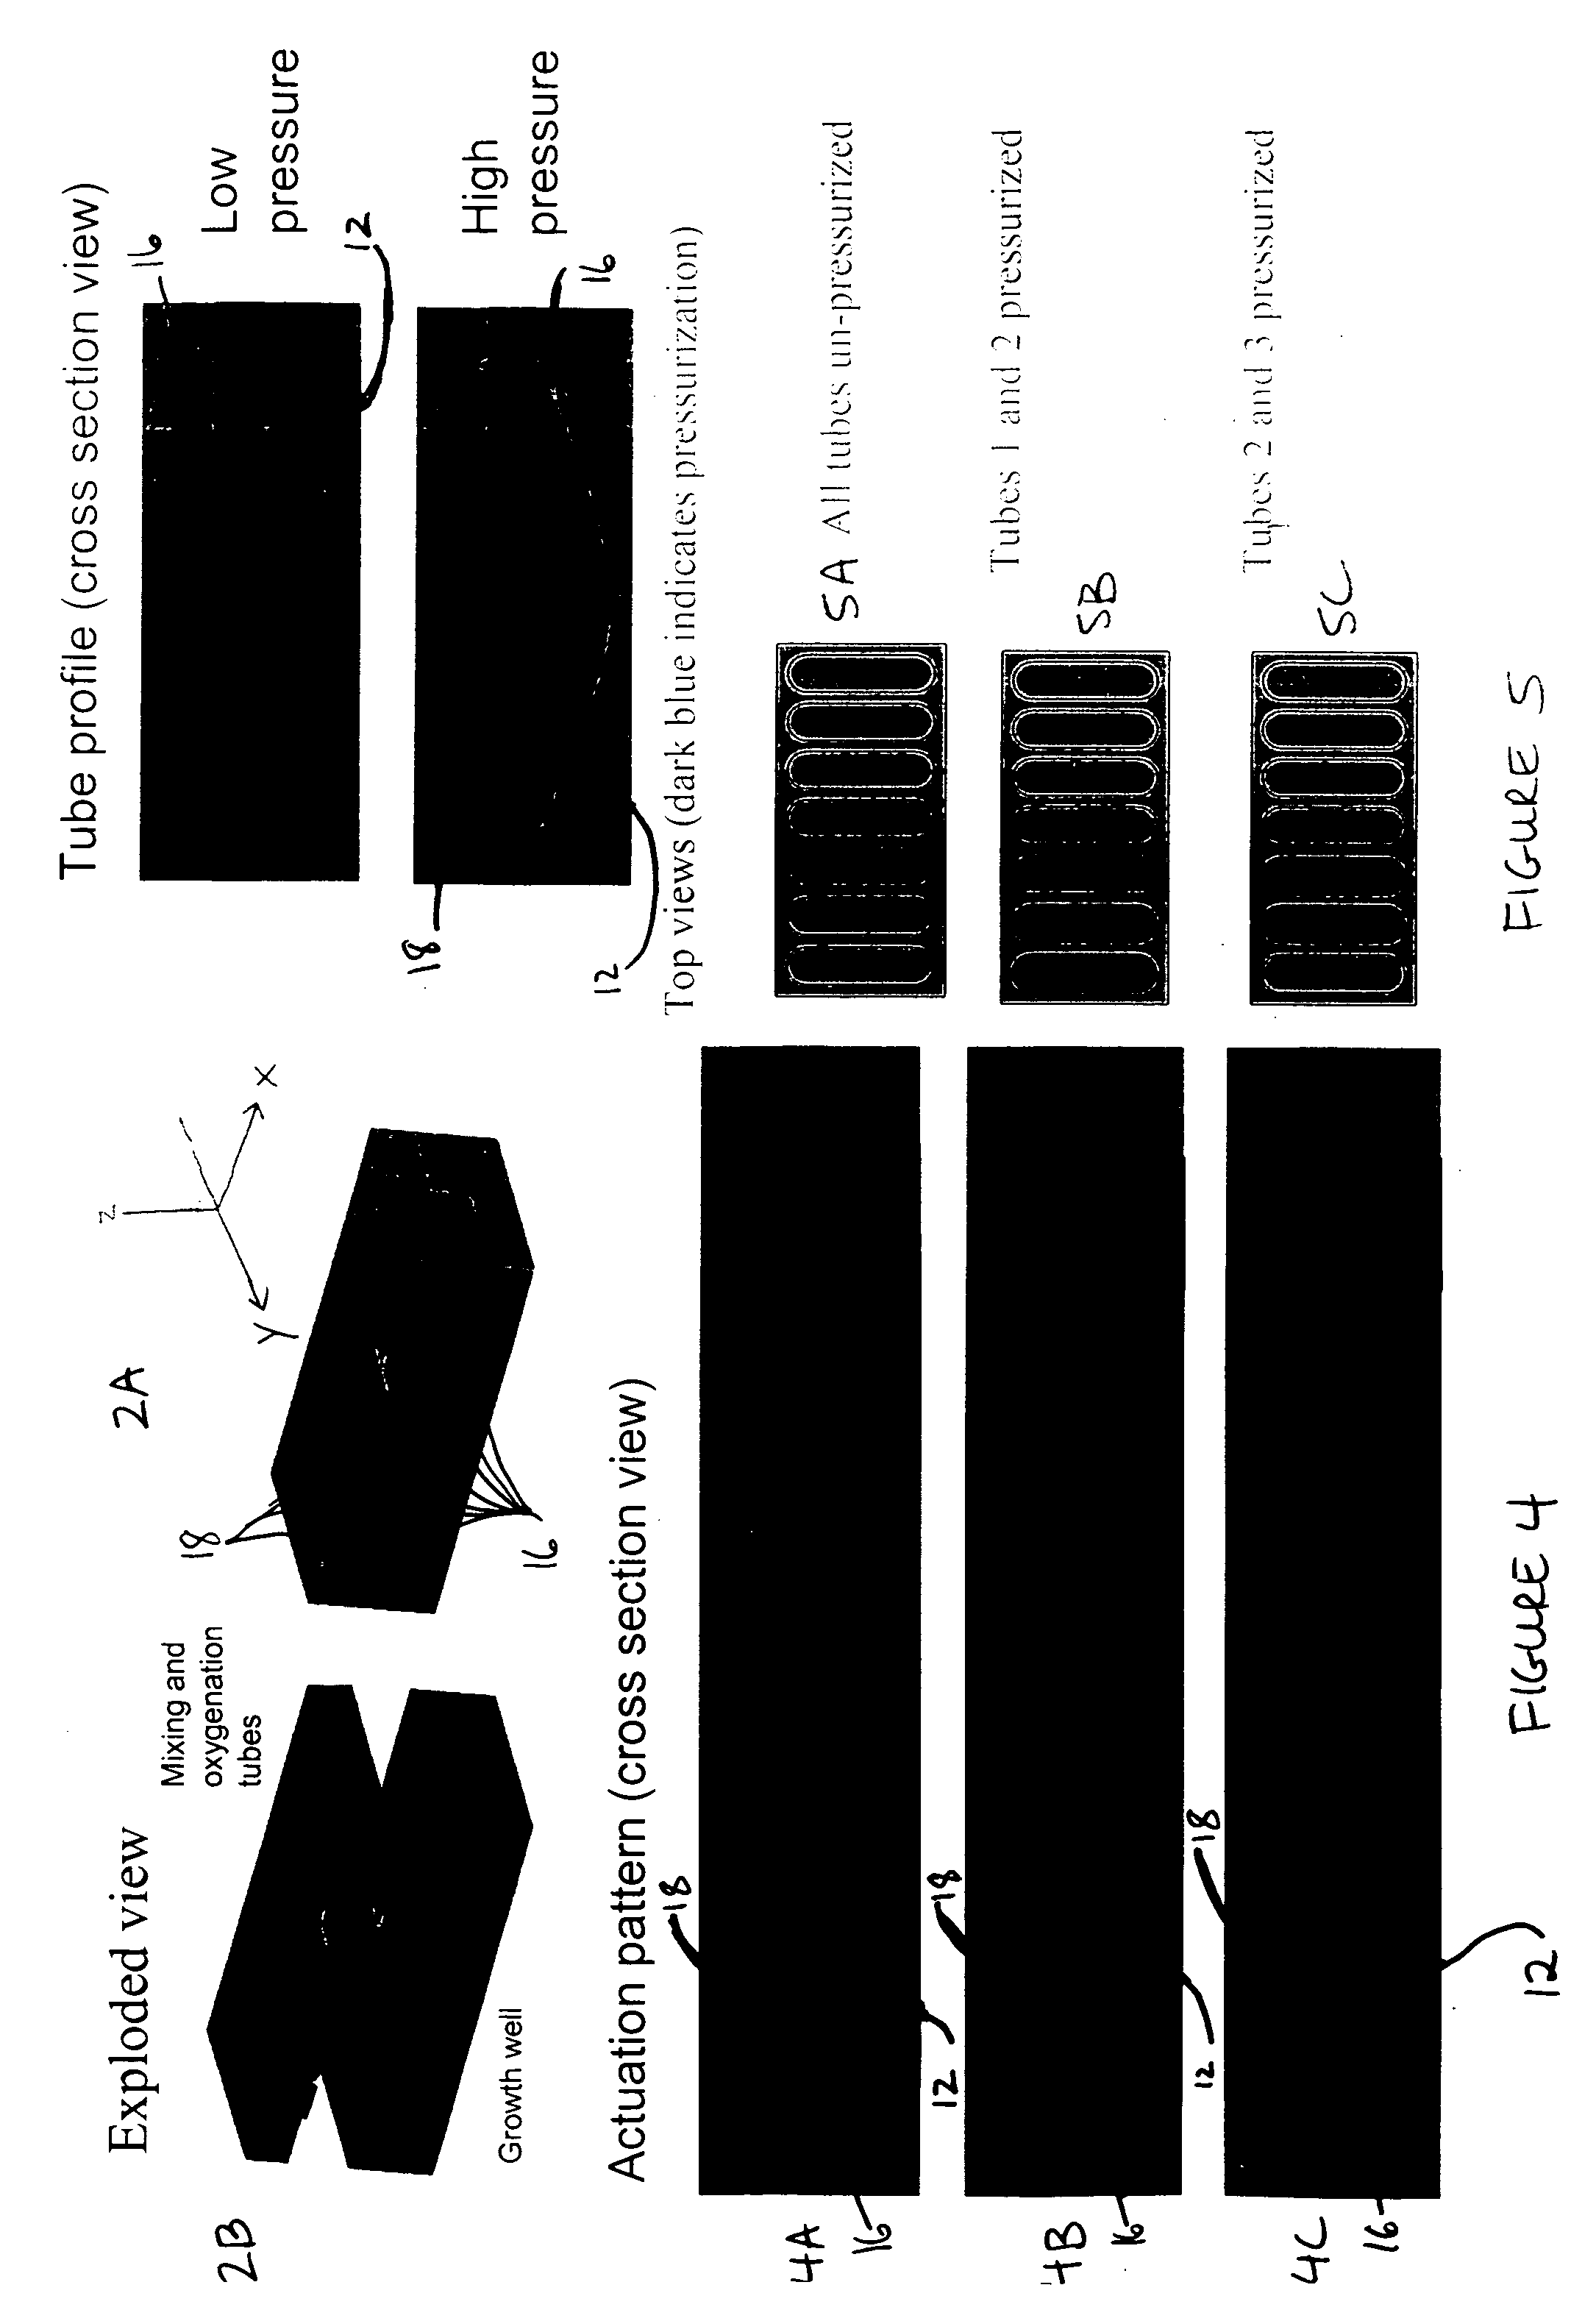 Peristaltic mixing and oxygenation system